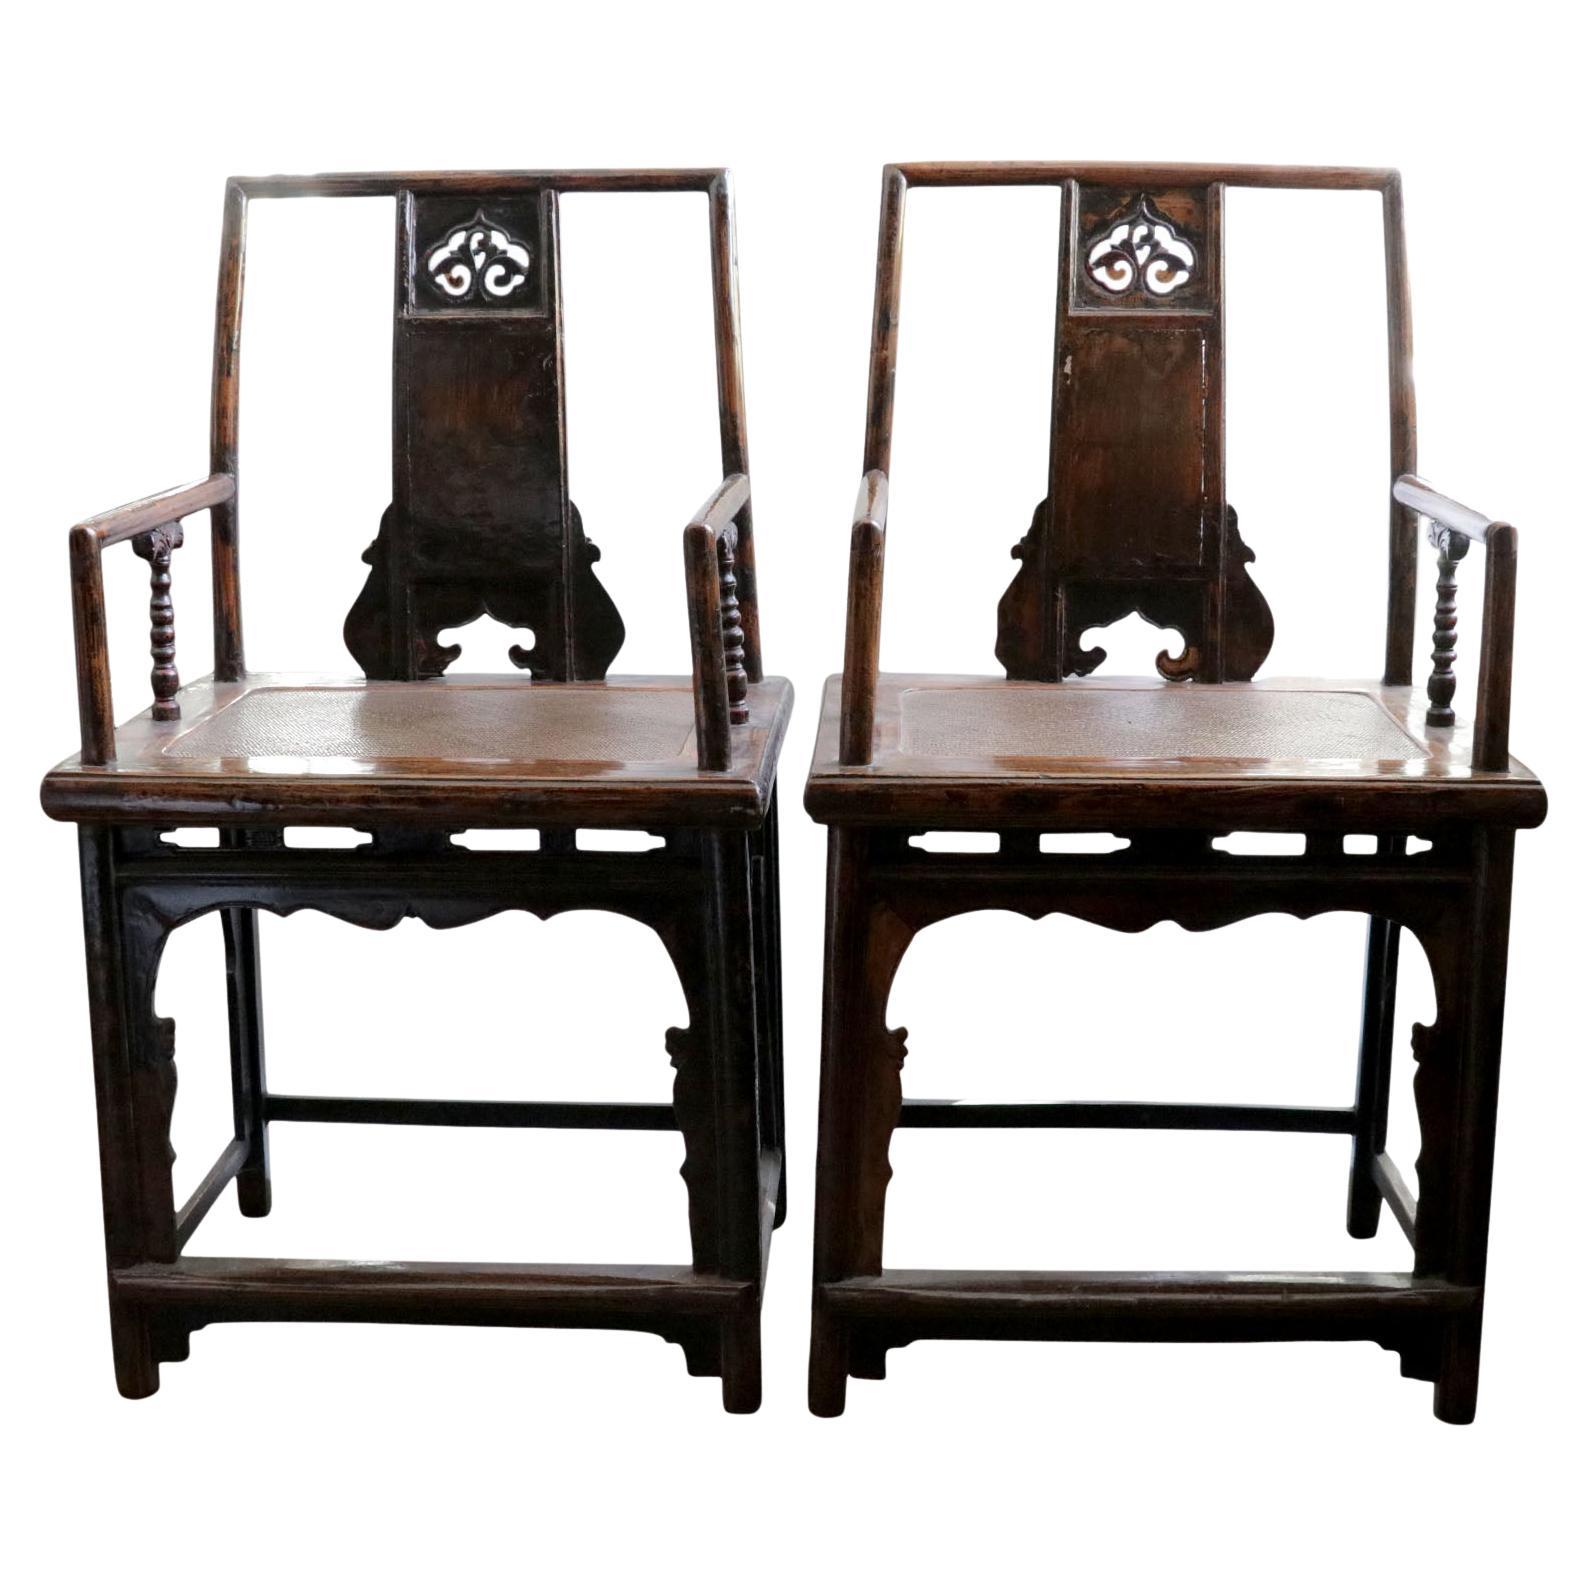 Antique Chinese Chairs, Pair